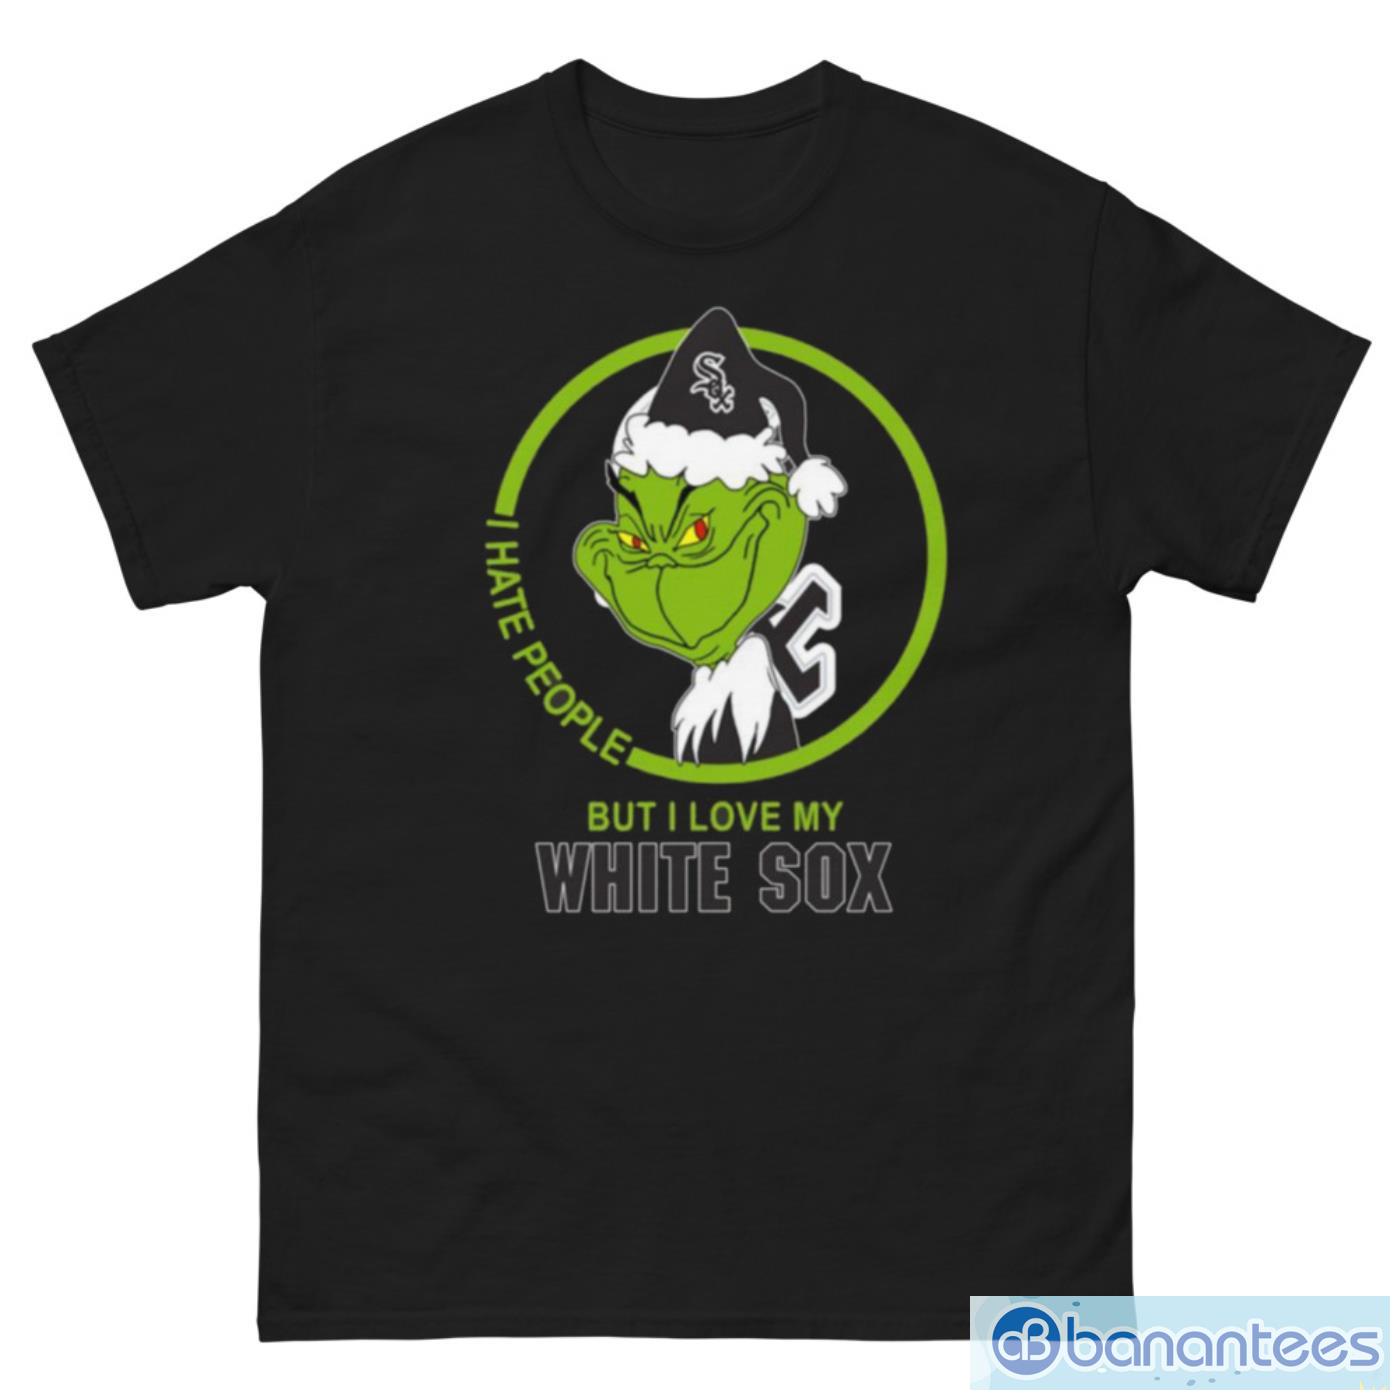 Chicago White Sox MLB Grinch I Hate People But I Love My Favorite Baseball Team T Shirt - G500 Men’s Classic Tee